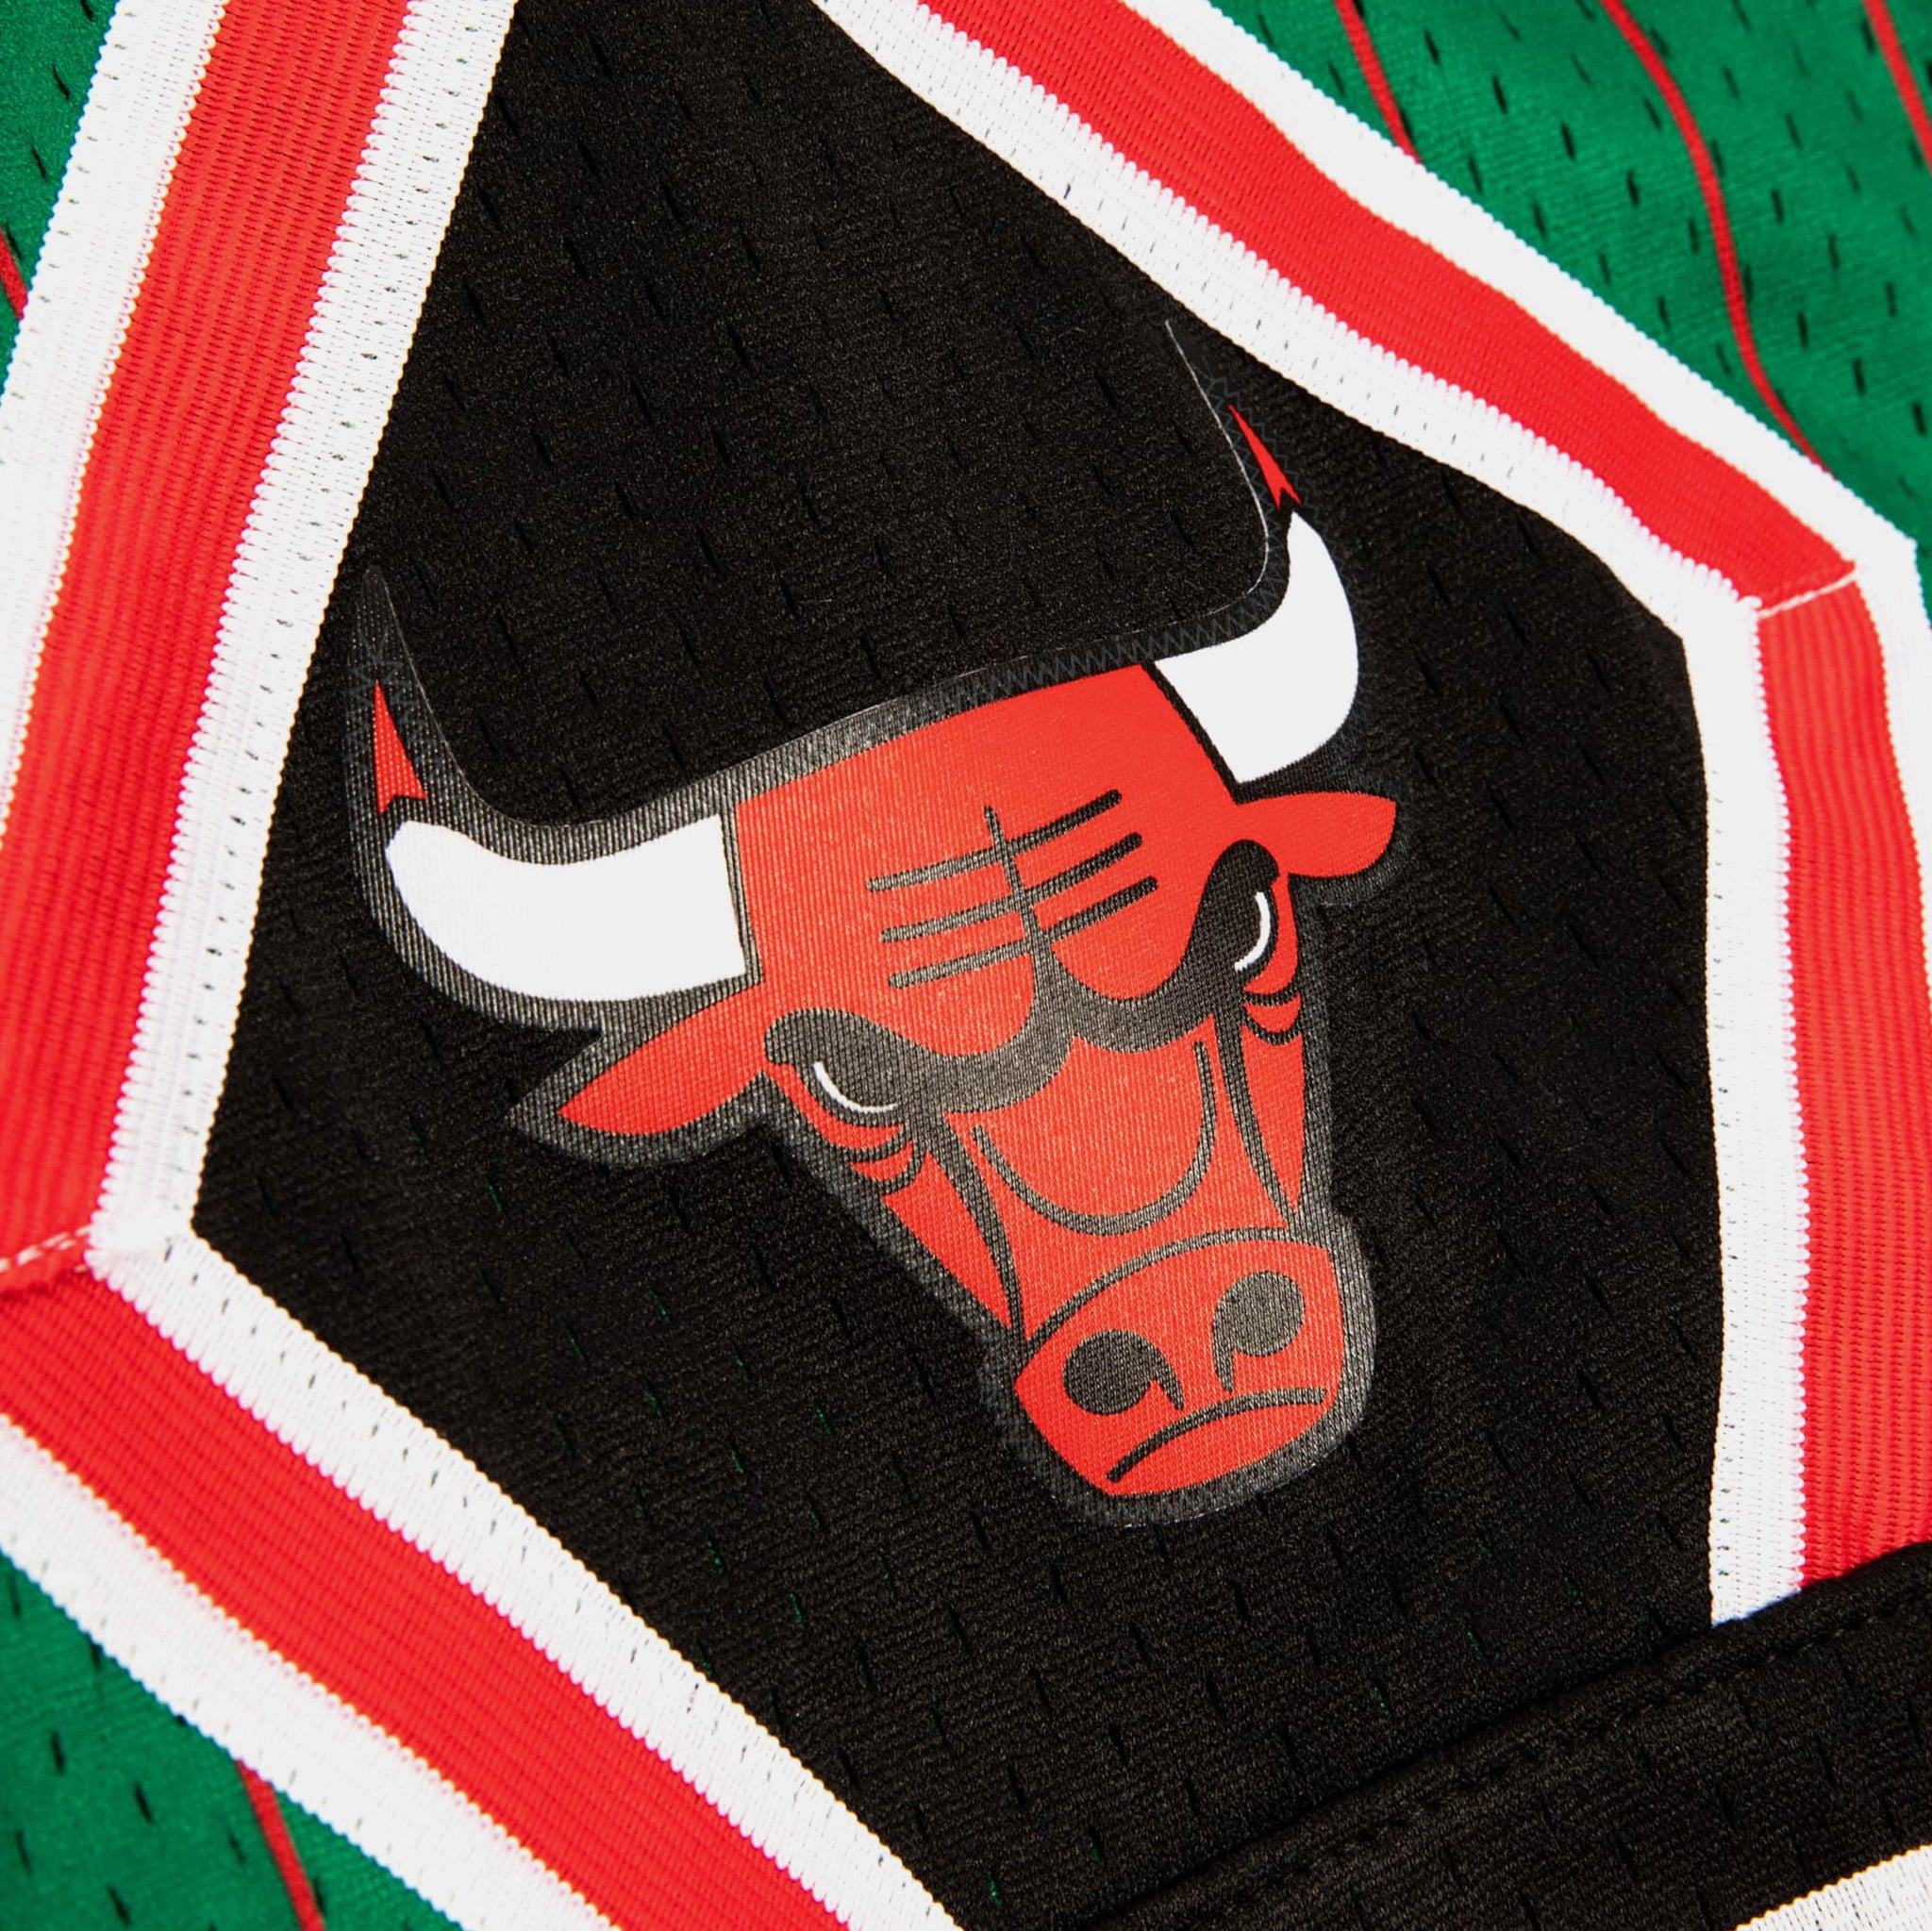 Mitchell & Ness Chicago Bulls Blow Out Shorts Mens Shorts (Black)